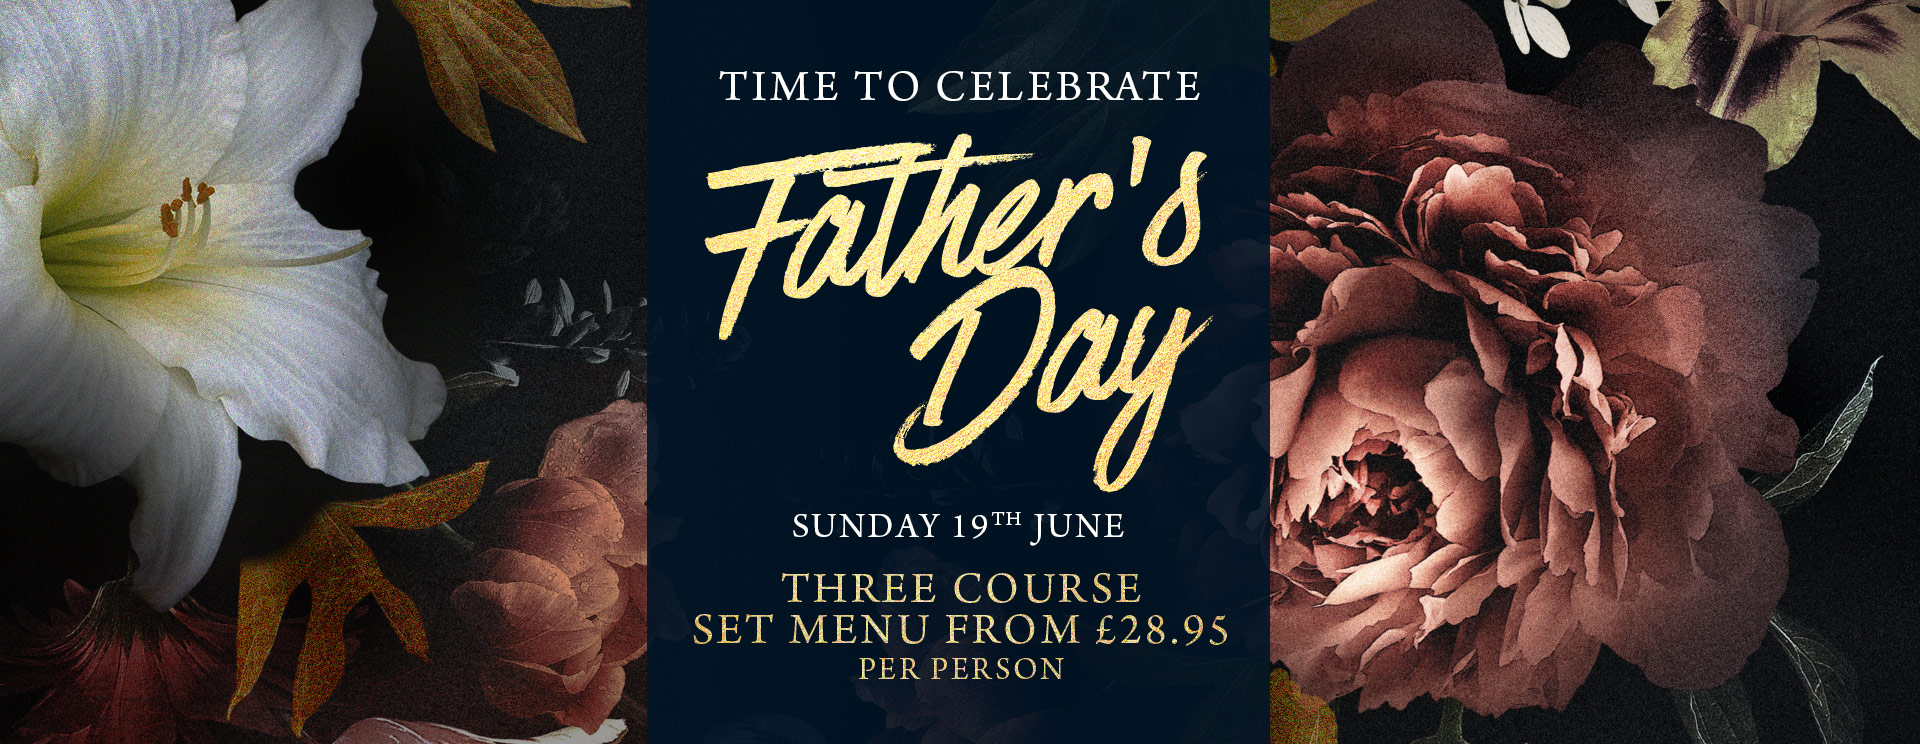 Fathers Day at The Encore